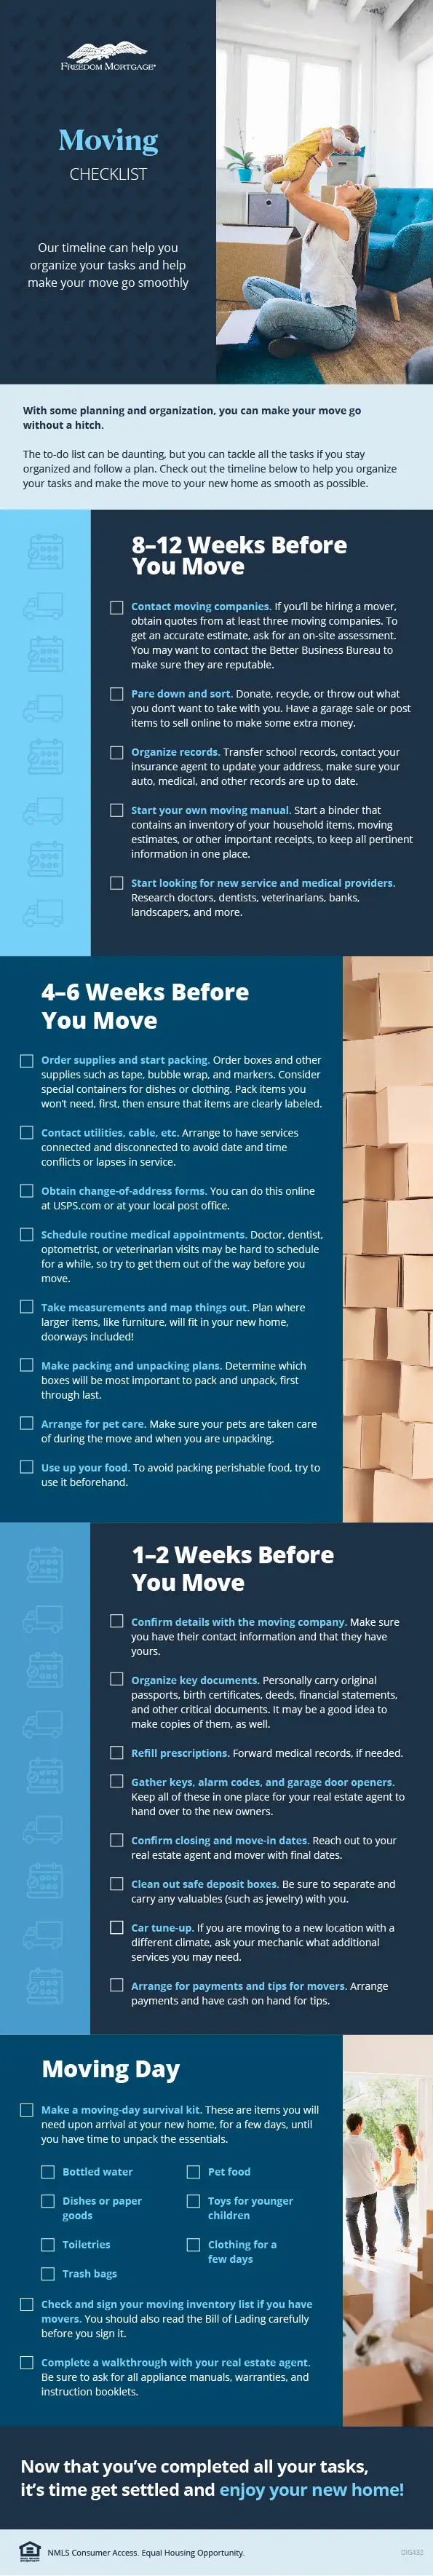 Moving Checklist infographic image